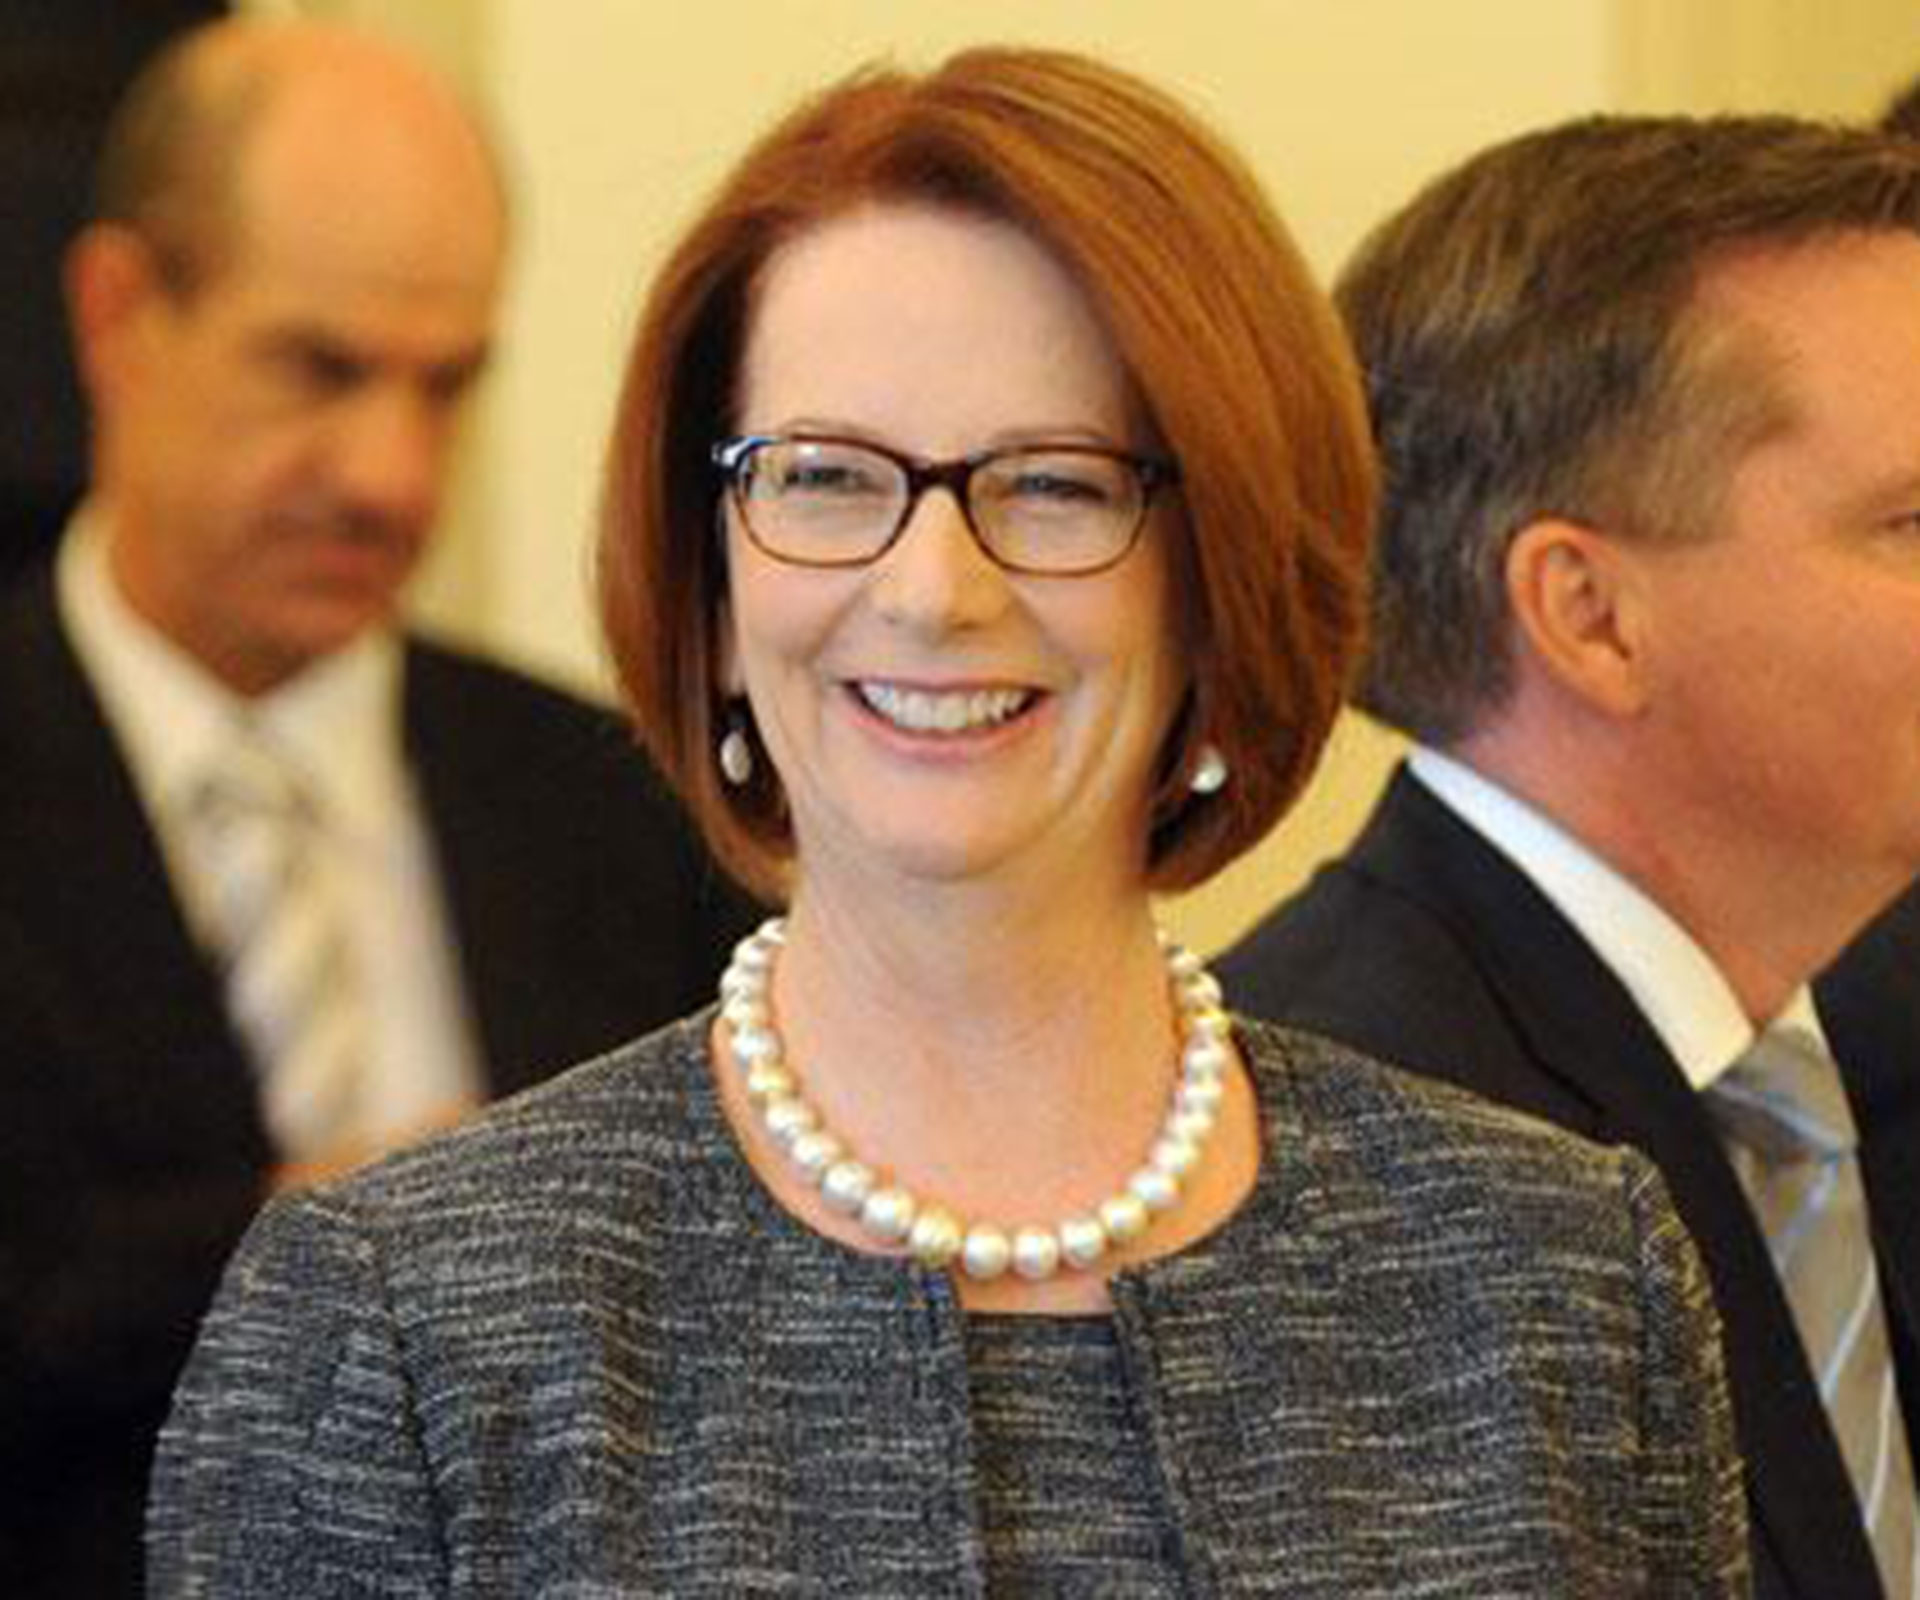 Julia Gillard reveals she battled with anxiety as Prime Minister